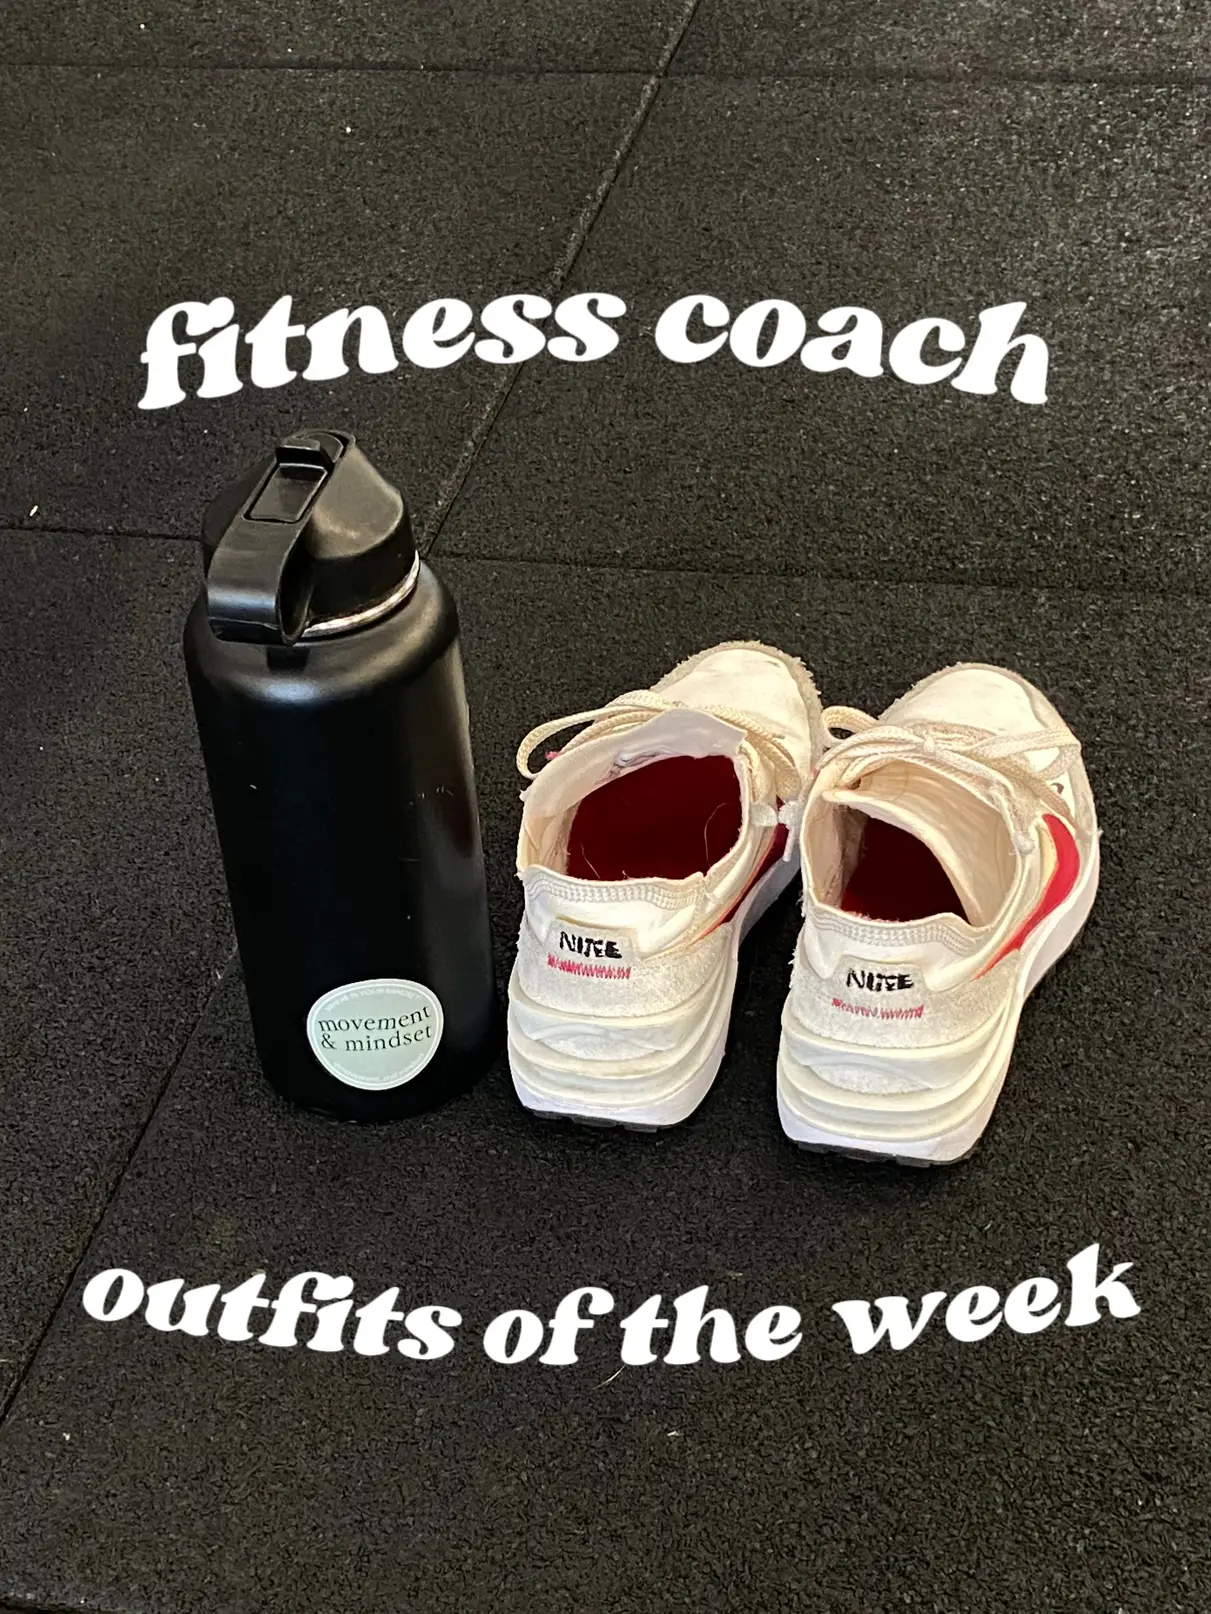 What I Wore To Work This Week -As a Fitness Coach!